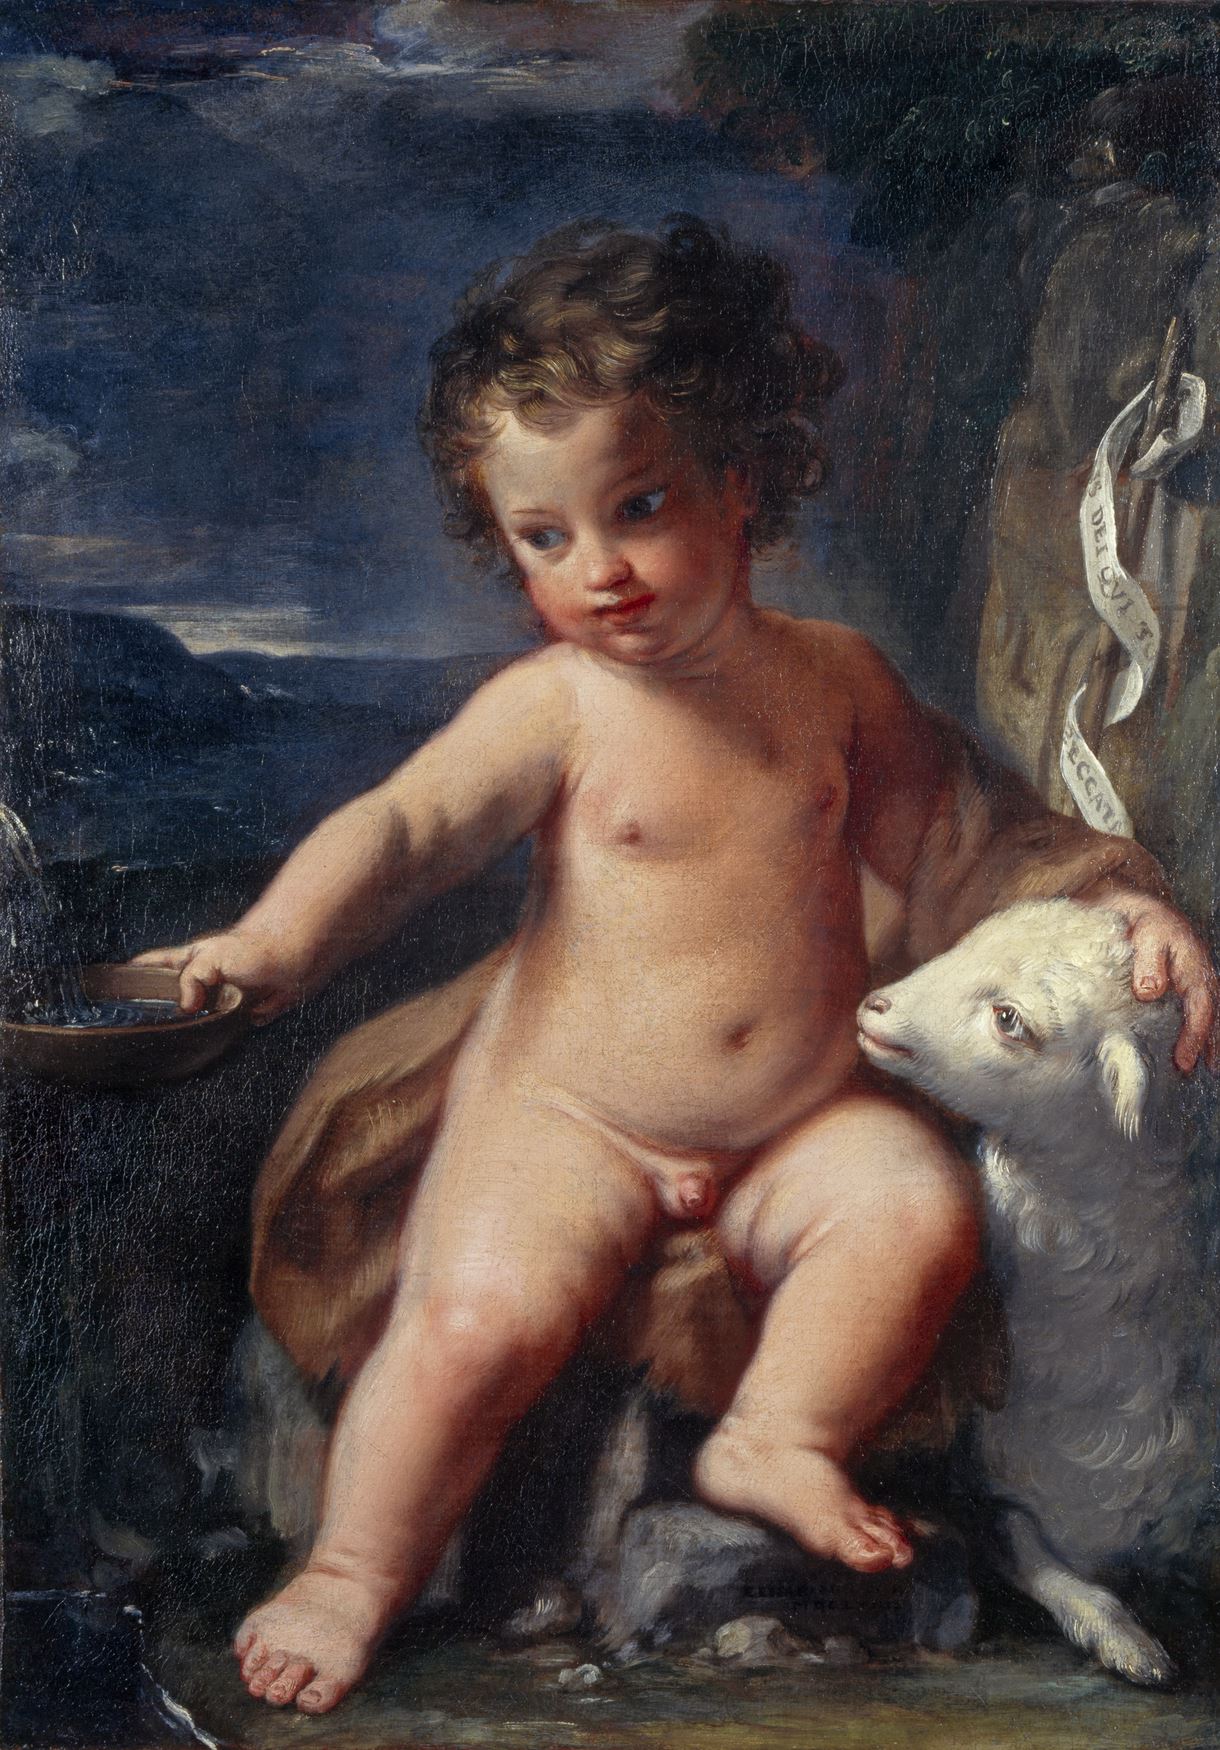 A nude Infant Saint John the Baptist fills the composition, sitting on a rock alongside a lamb. He holds a small dish that he is filling with water. He has large, expressive eyes and brown curls. He looks intently at the dish, seemingly unaware of the viewer. He rests one hand on the lamb’s head.